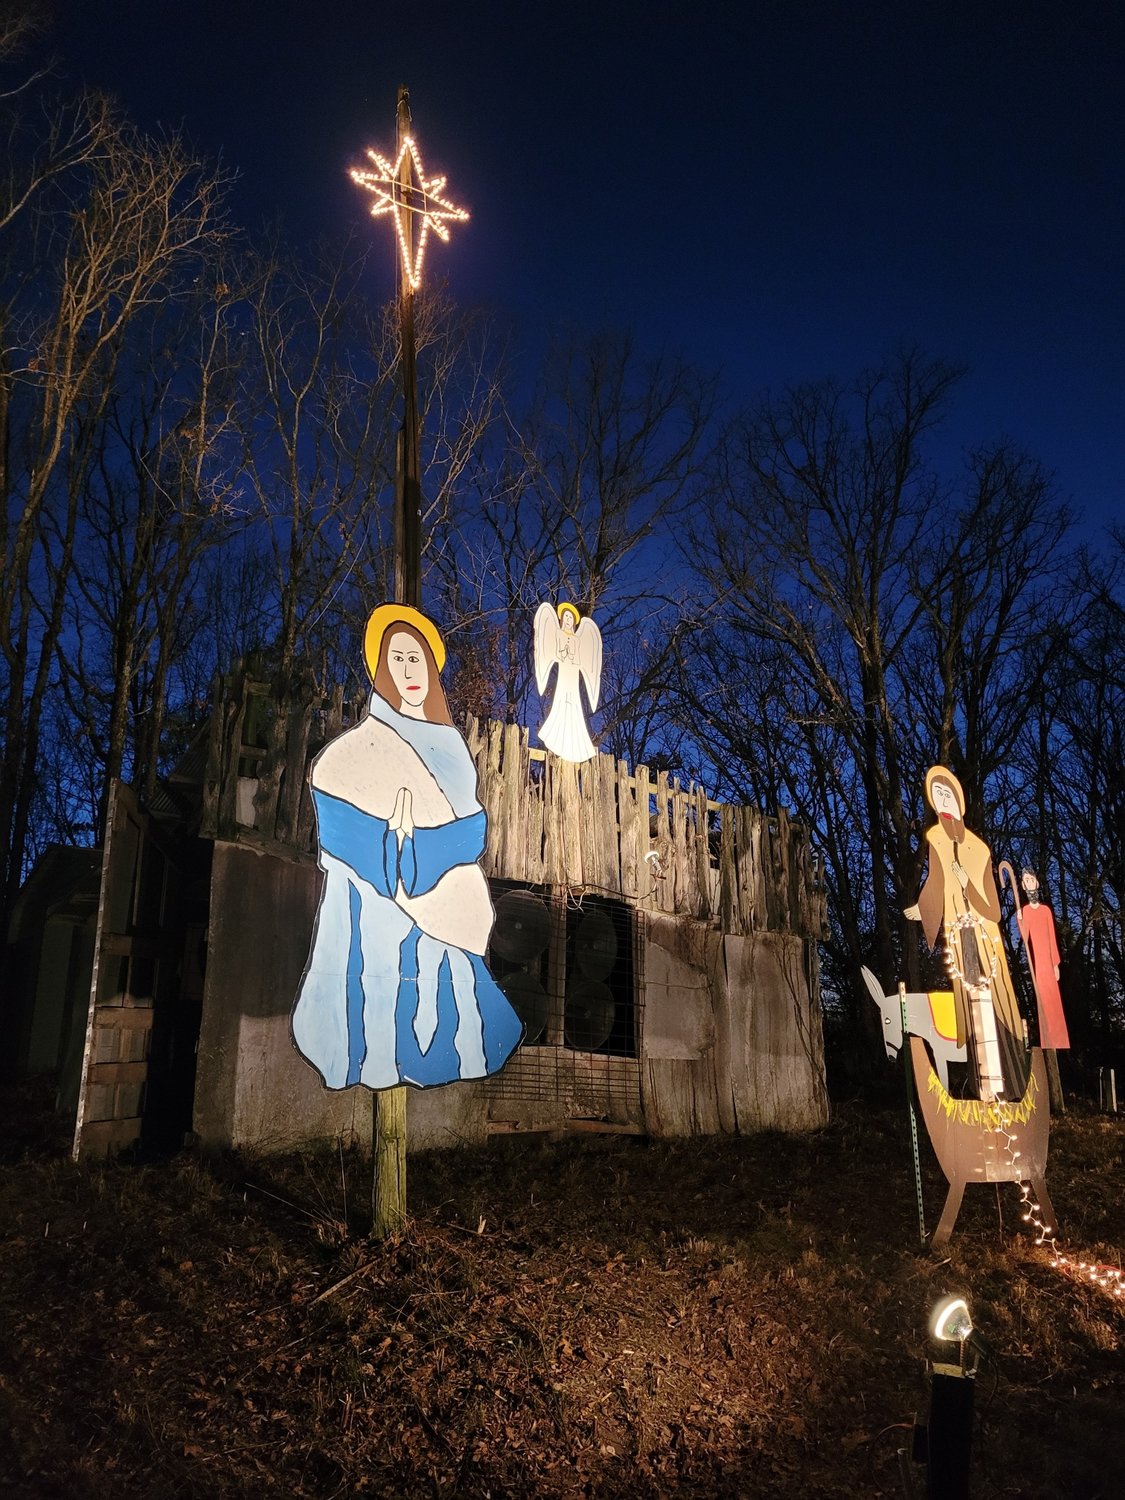 It's almost night when the lights come on at the Community Betterment Association's hilltop Nativity scene in Meta.